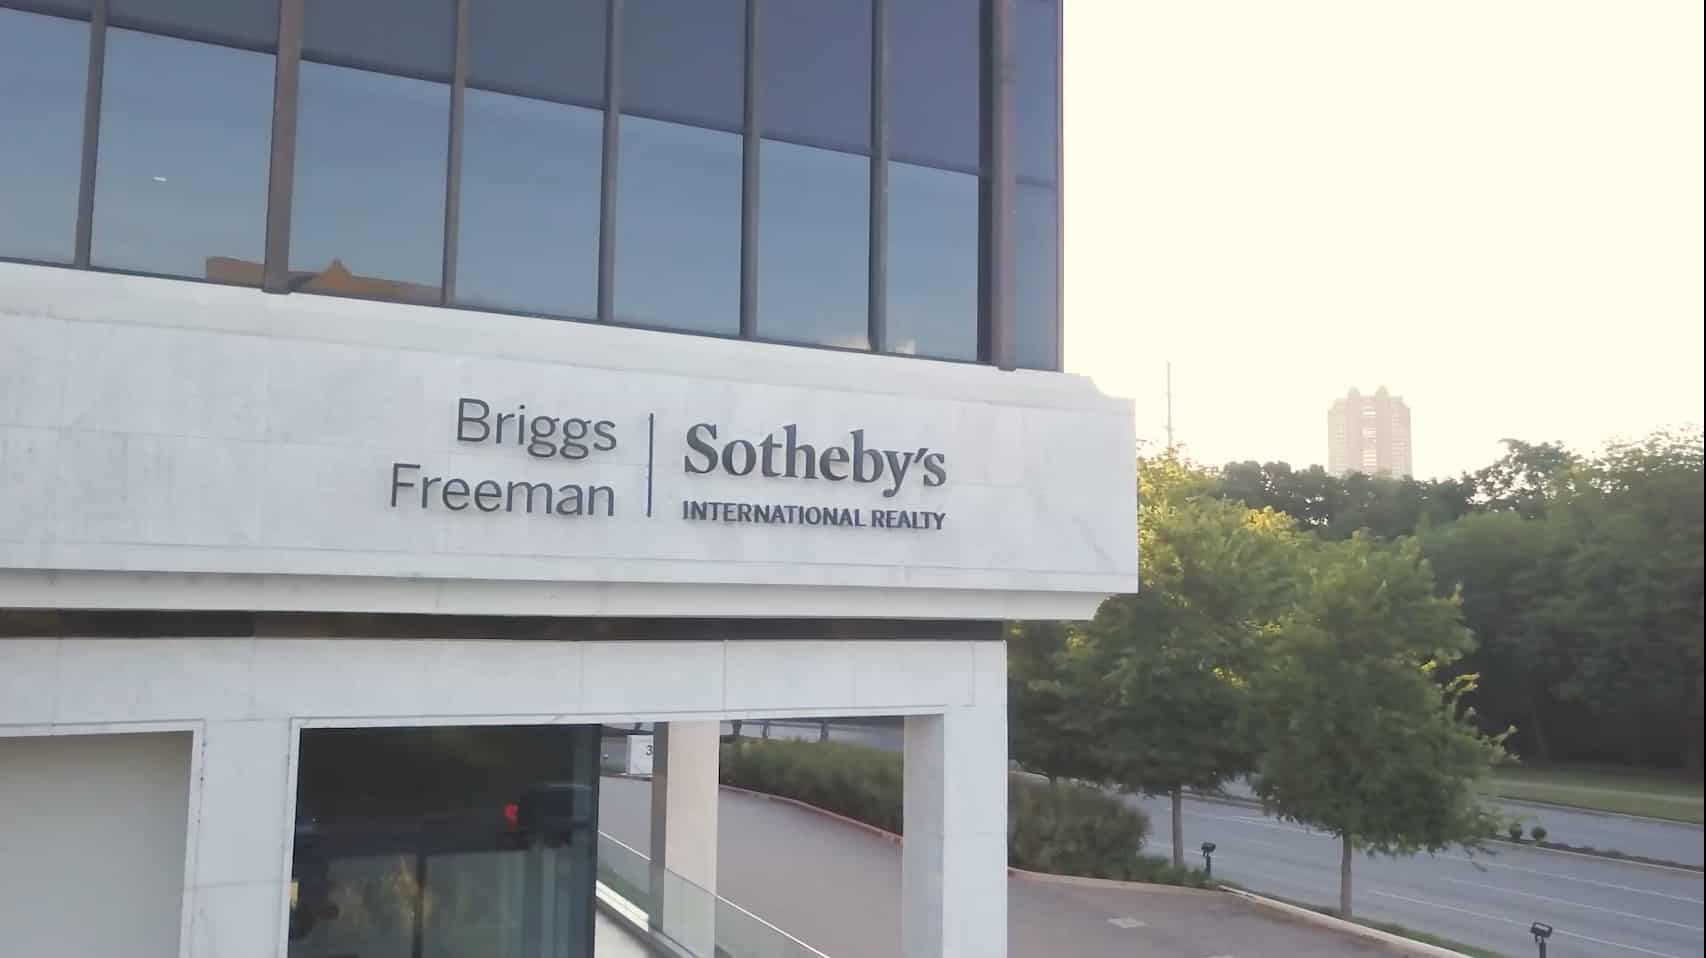 Sotheby's Auction House - Briggs Freeman Sotheby's International